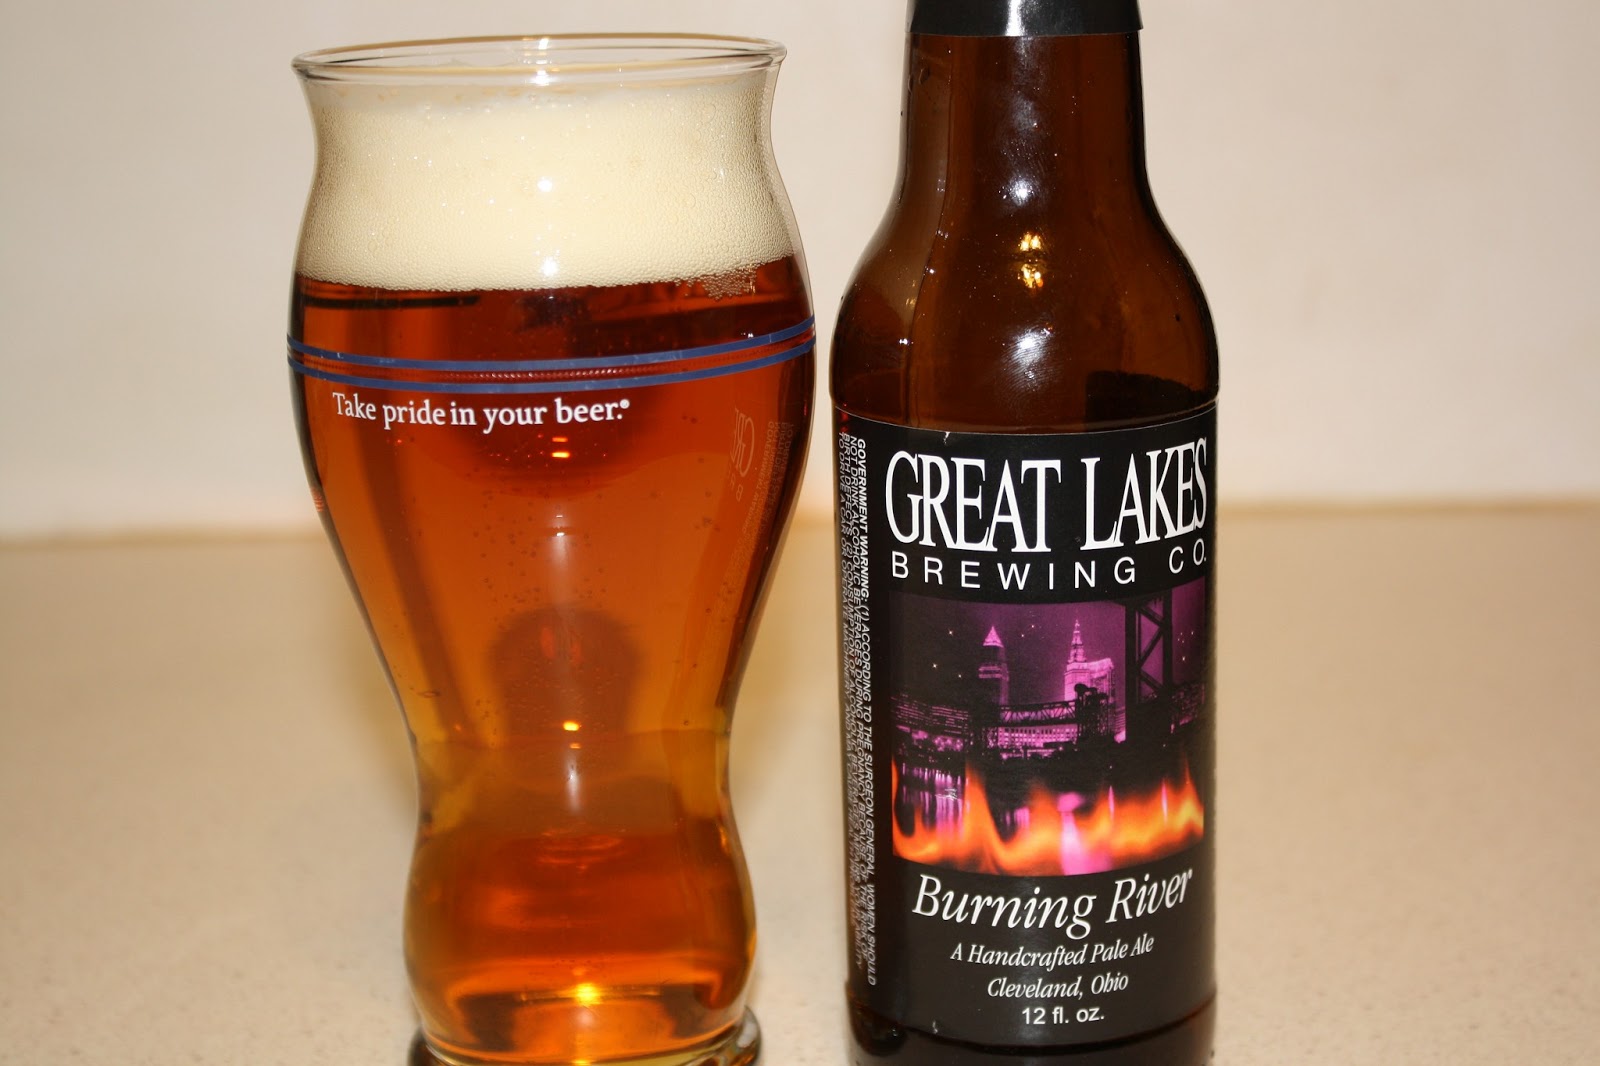 Another fine beer by Great Lakes. 